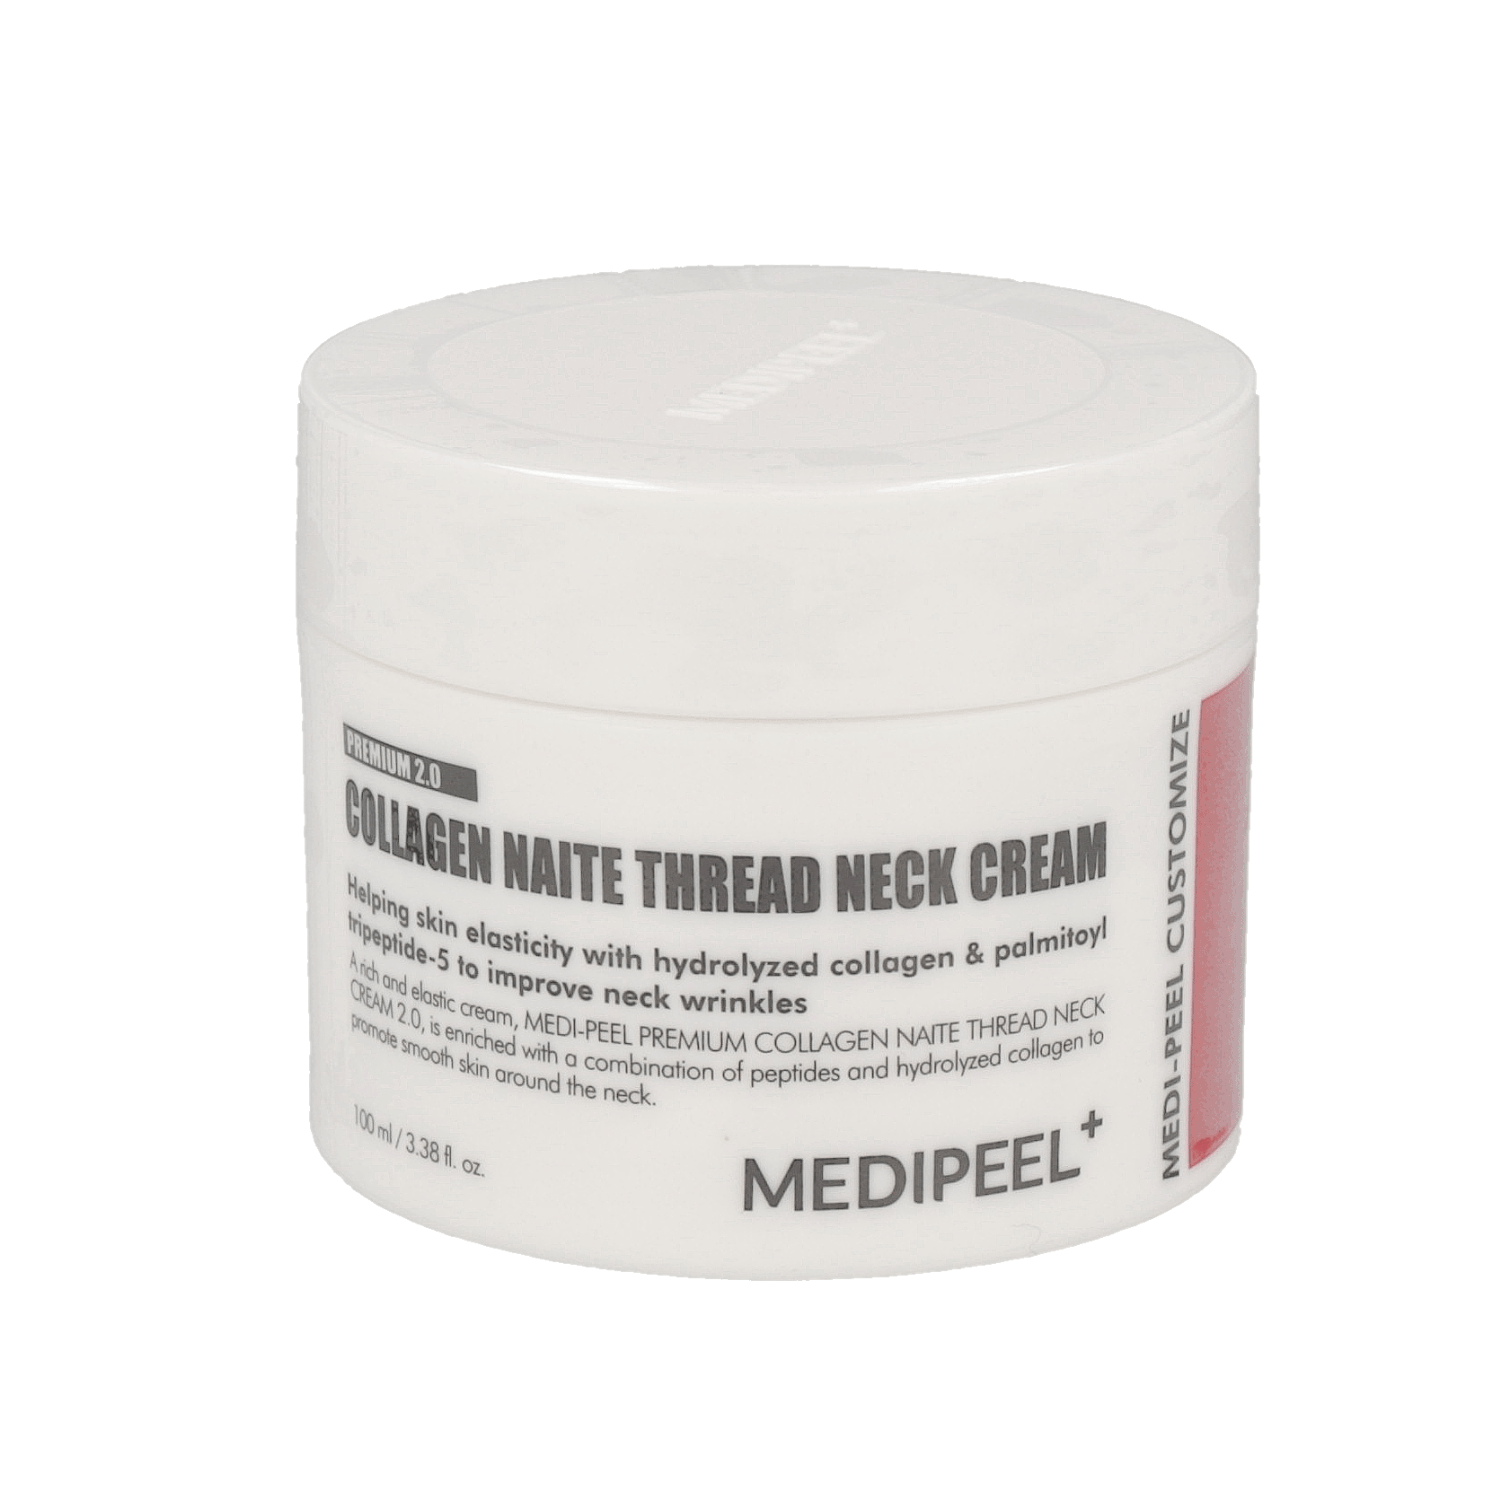 A bottle of MEDI-PEEL Collagen Naite Thread Neck Cream, white packaging with silver accents, 100ml